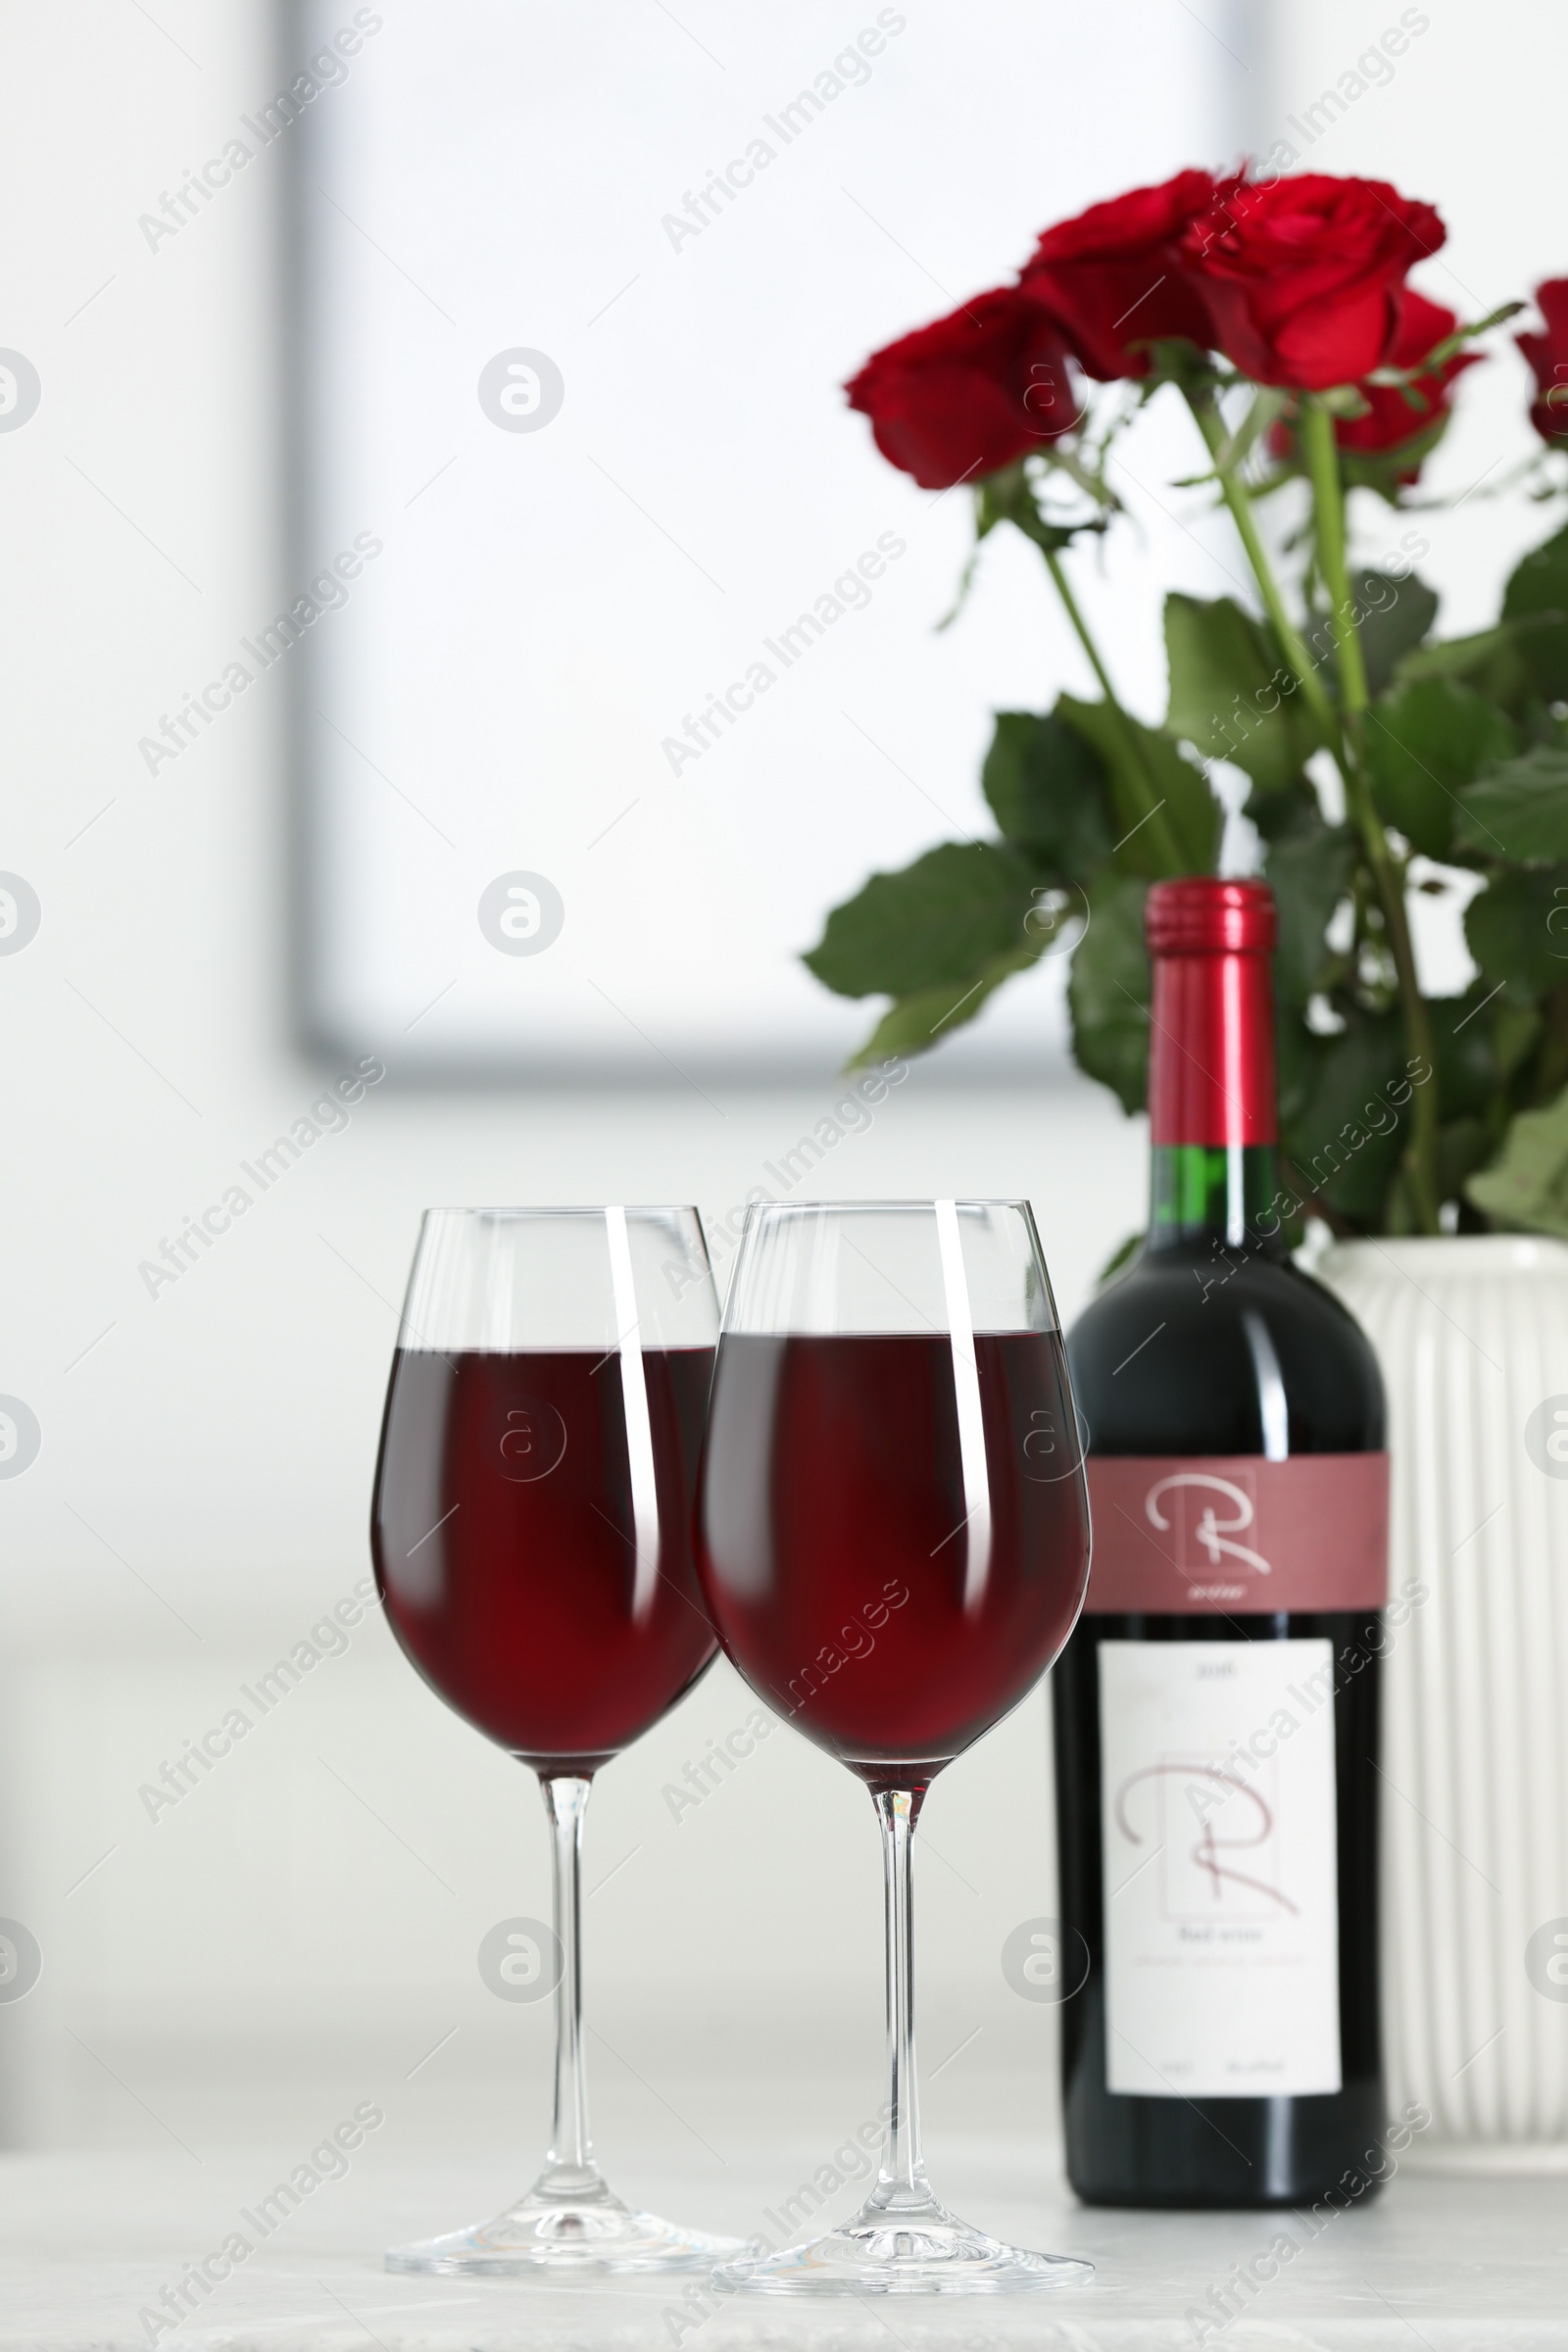 Photo of Bottle, glasses of red wine and vase with roses on table in room. Romantic date